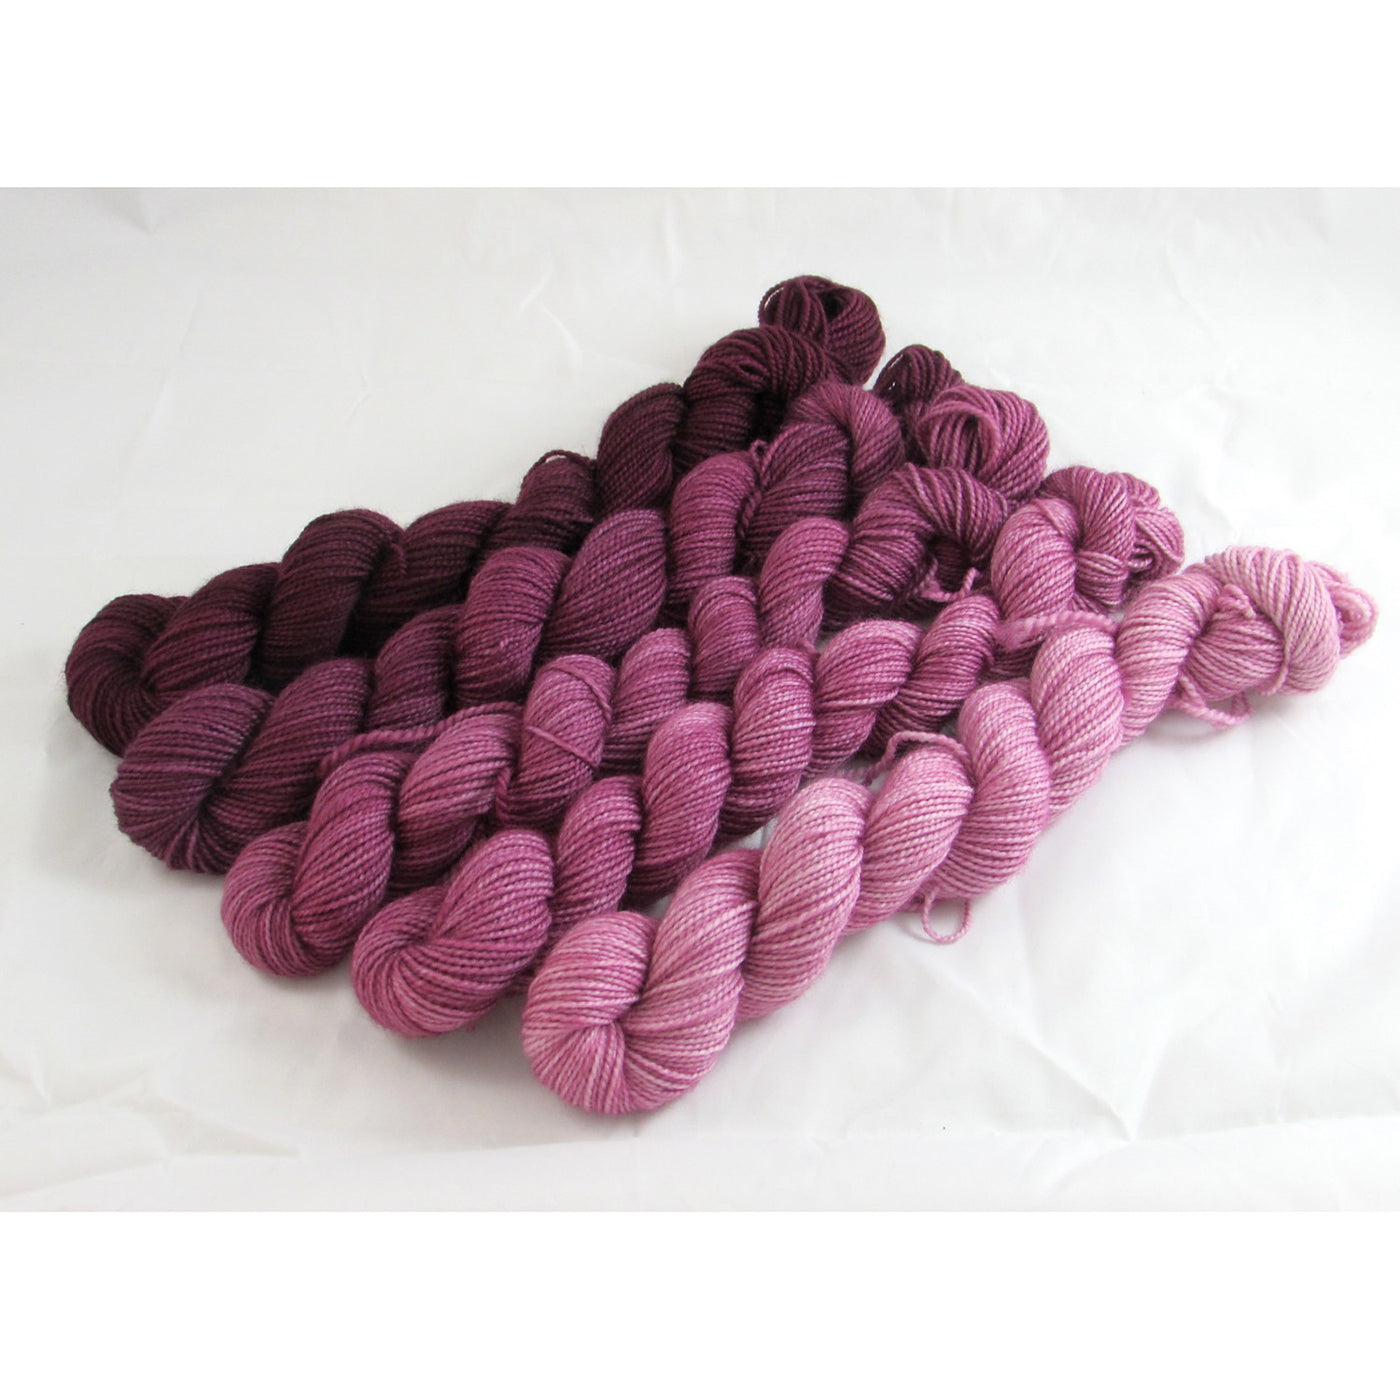 Lillian Gradient Bundle by Dirty Water DyeWorks in Mulled Wine